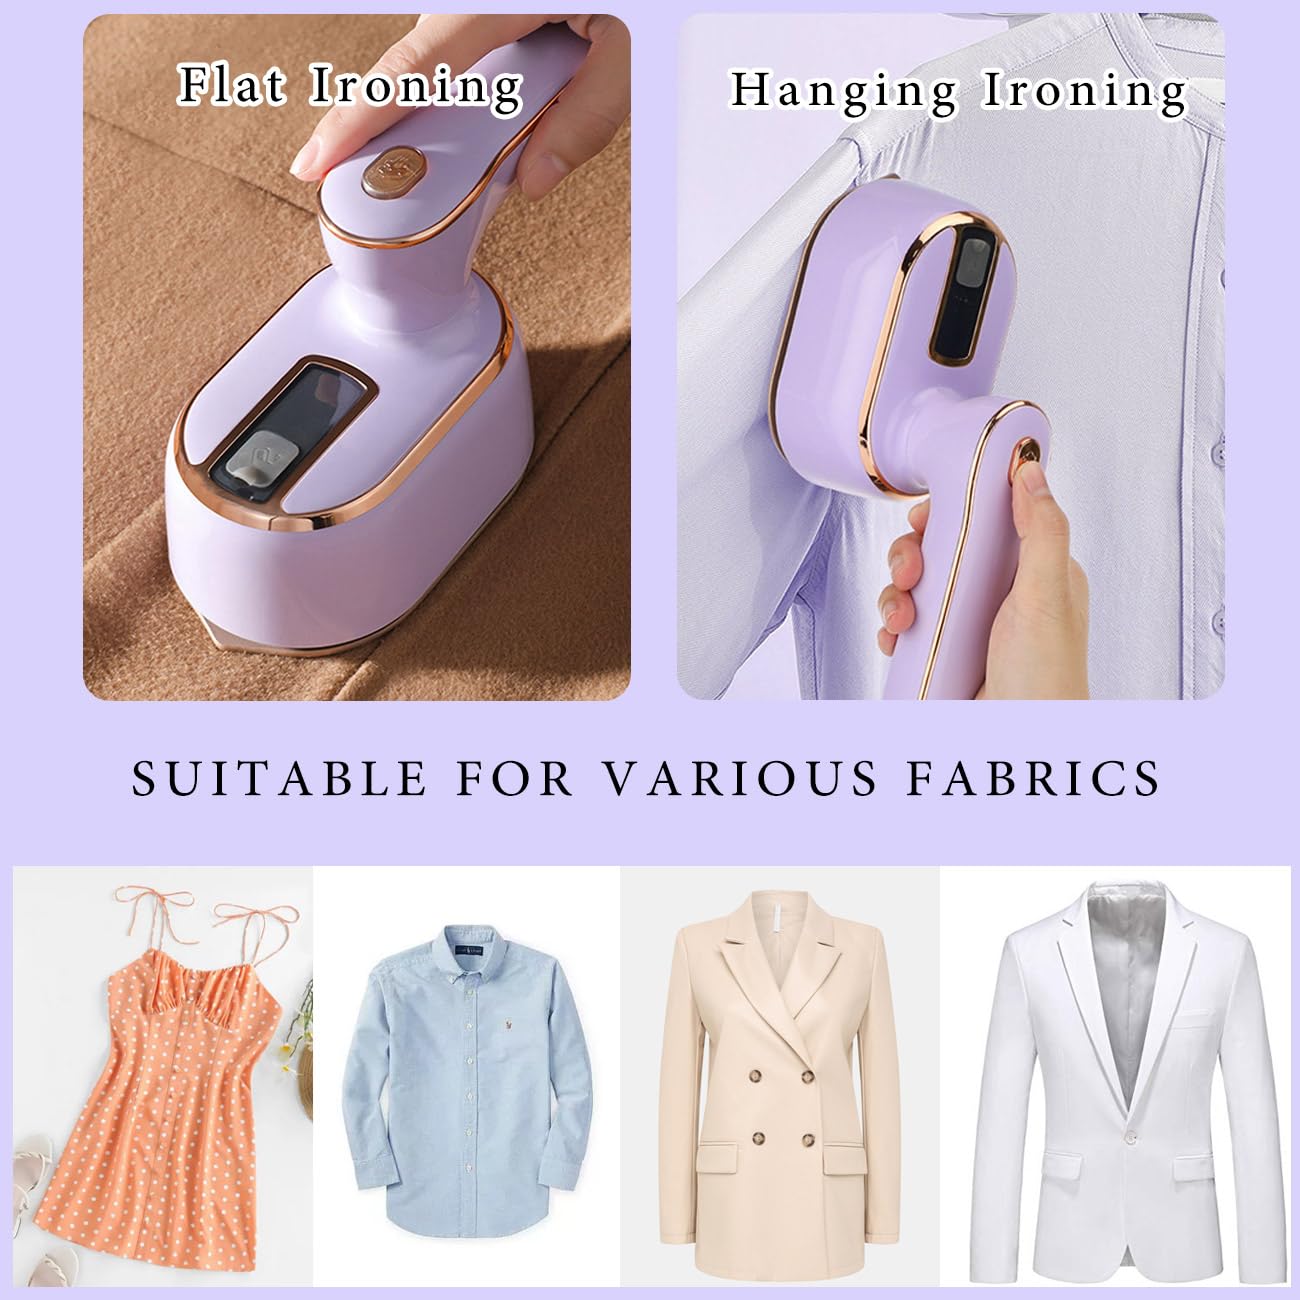 Travel Steamer Iron for Clothes Mini: handheld size portable fabric clothing steamers small hand garment electric steam ironing machine for dress shirt plancha a de vapor para ropa portatil travel essentials